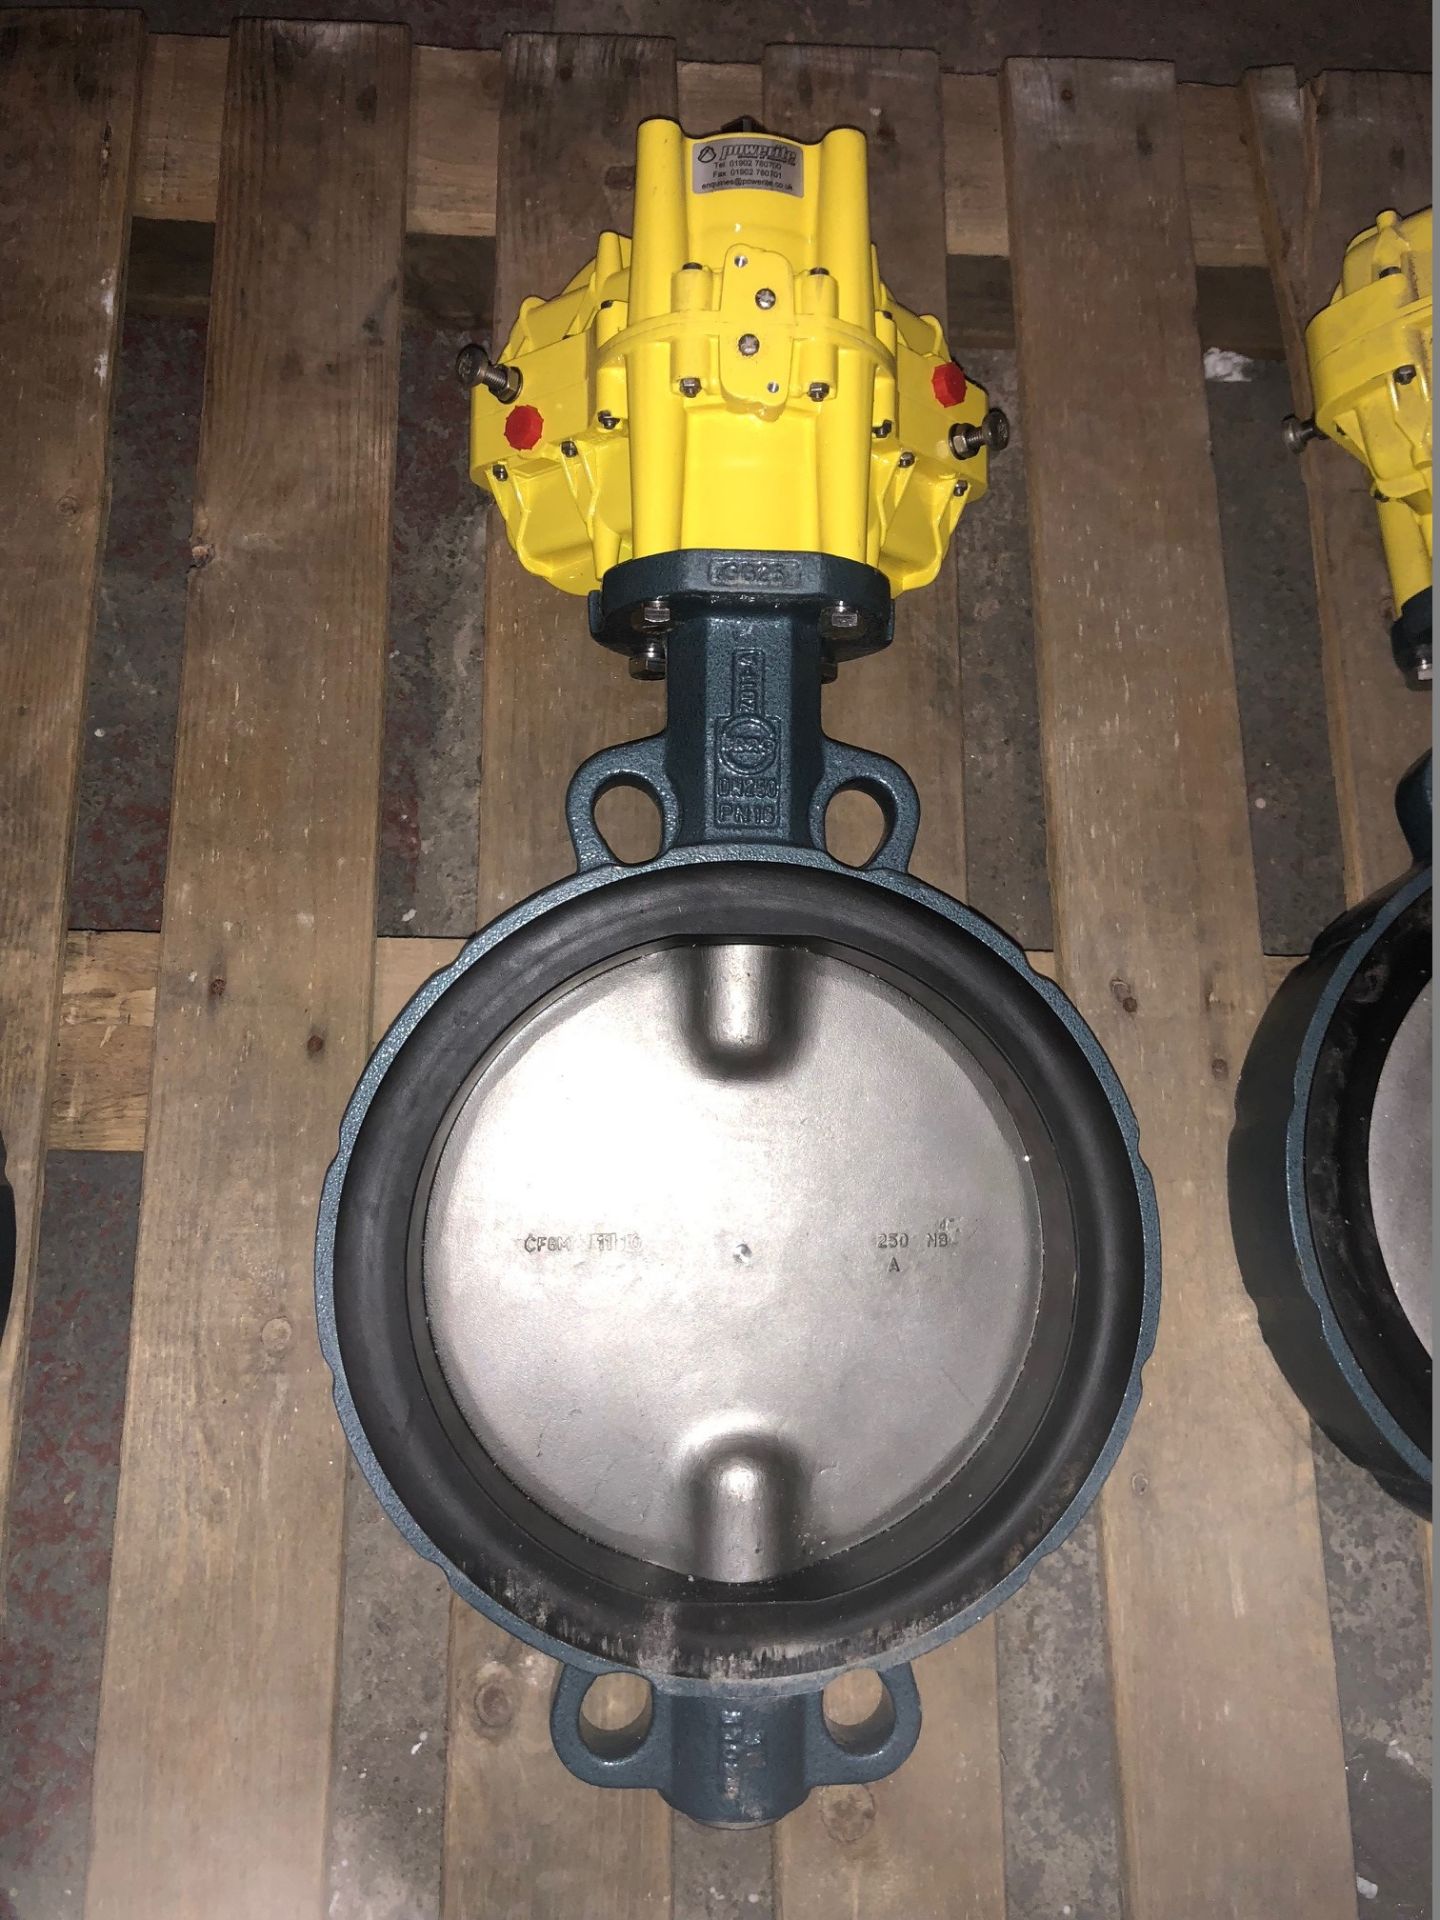 10" Cast Iron Butterfly Valve With a Kinetrol Model 10 Actuator Attached - Image 2 of 3